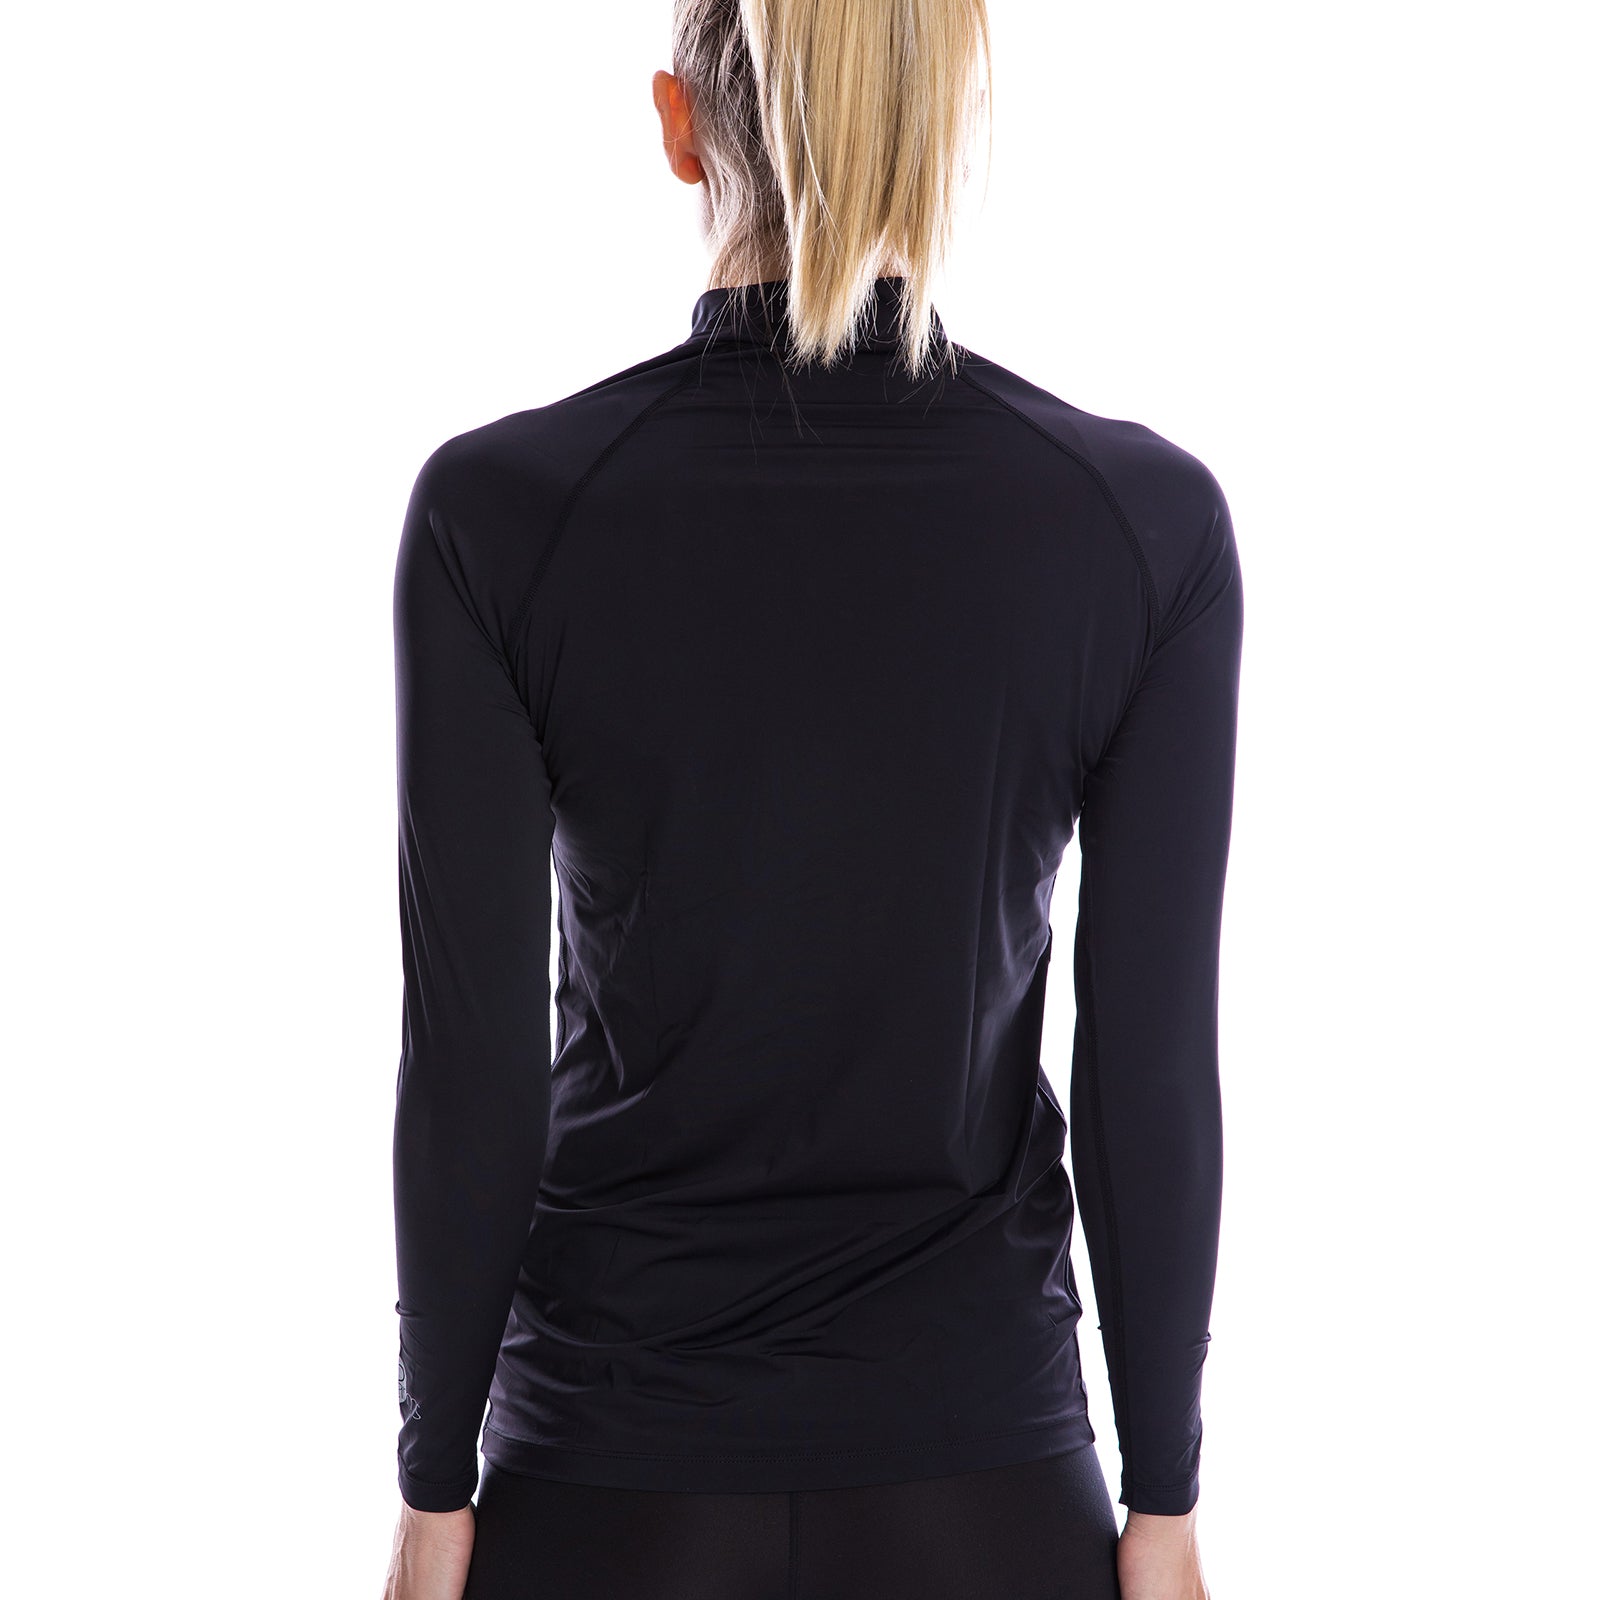 Sun Protection SP Body - Women's high neck - SParms America